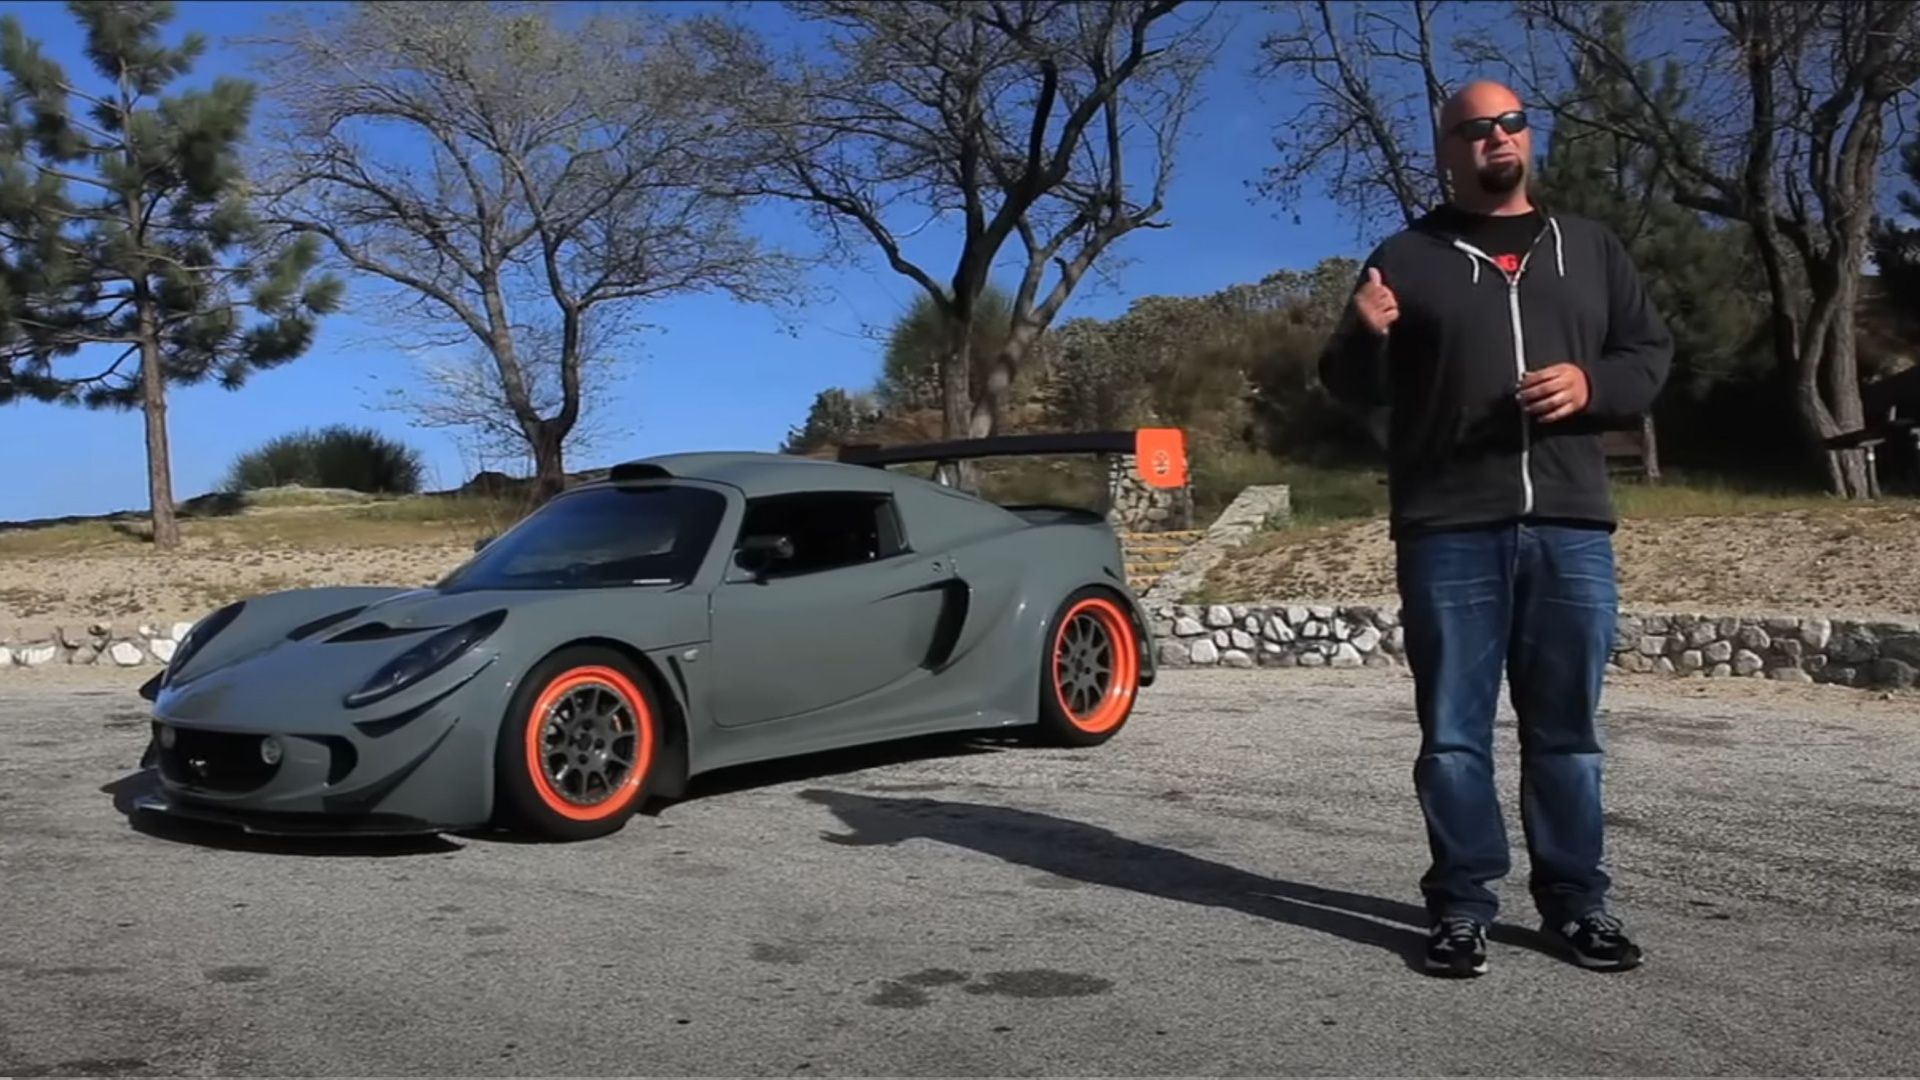 The World's Fastest Lotus Exige parked in a lot with Matt Farah standing next to it